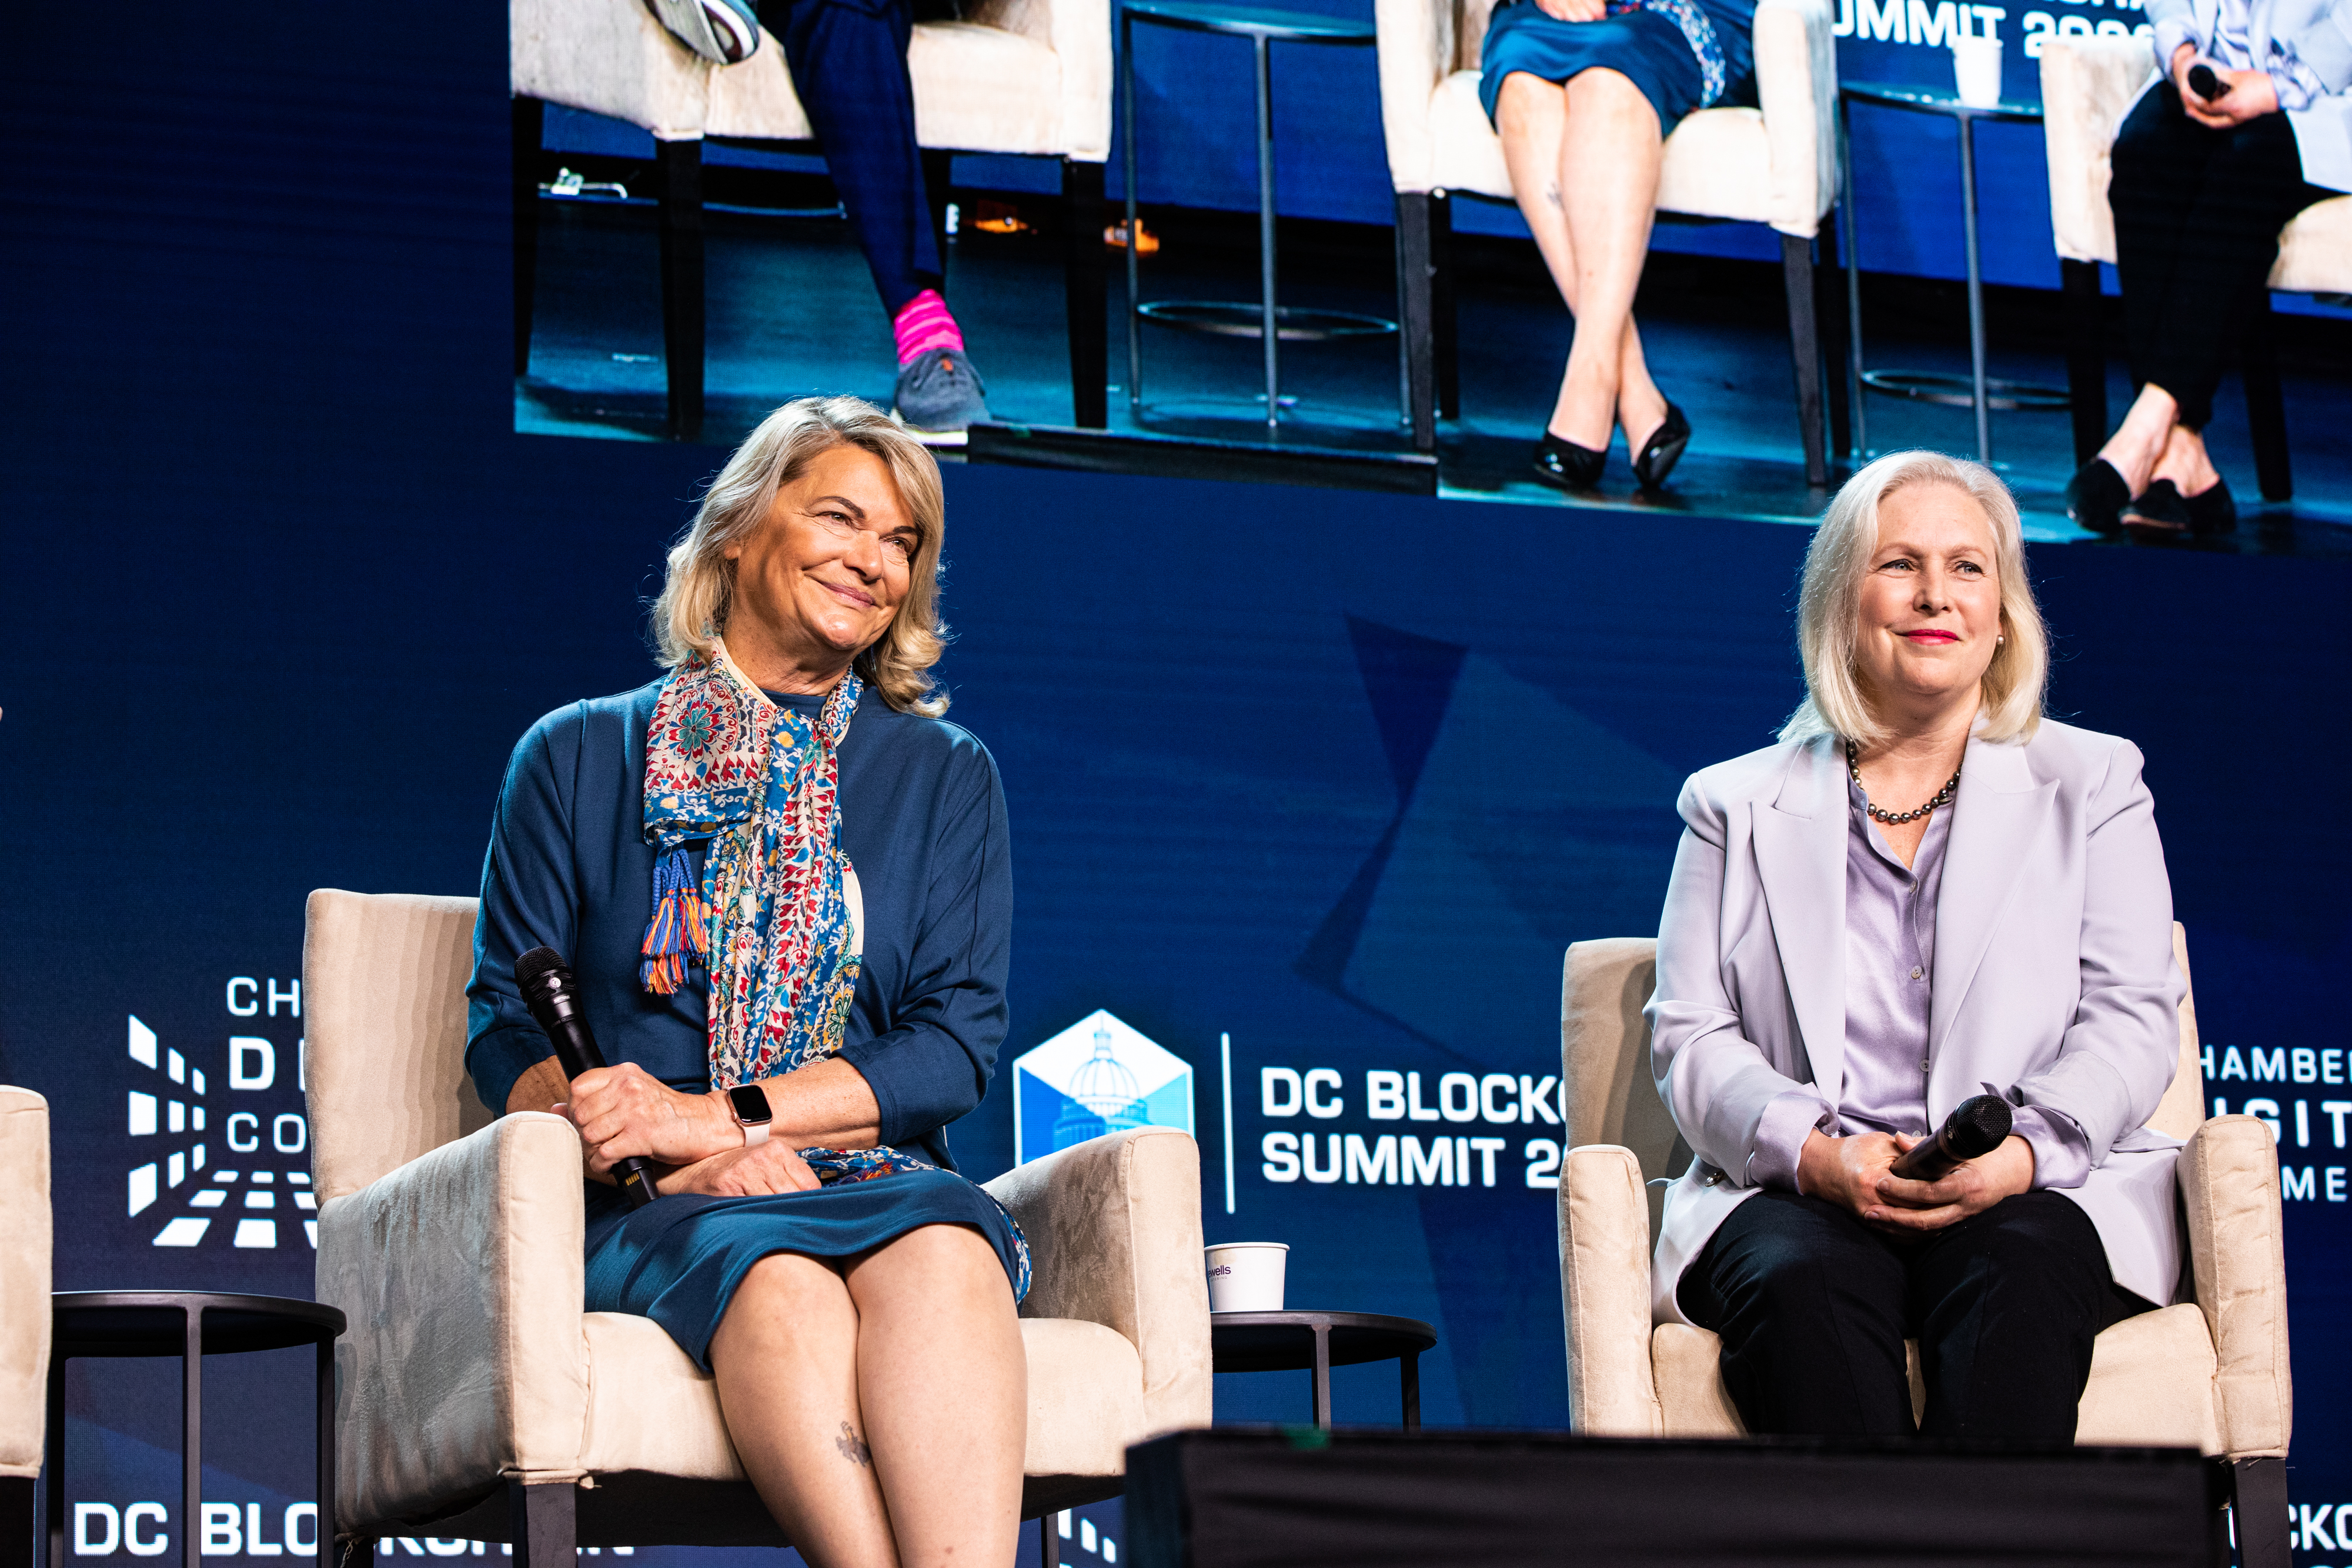 Senators Cynthia Lummis, left, and Kirsten Gillibrand at the DC Blockchain Summit in Washington, D.C. in May 2022. (Valerie Pleasch/Bloomberg via Getty Images)